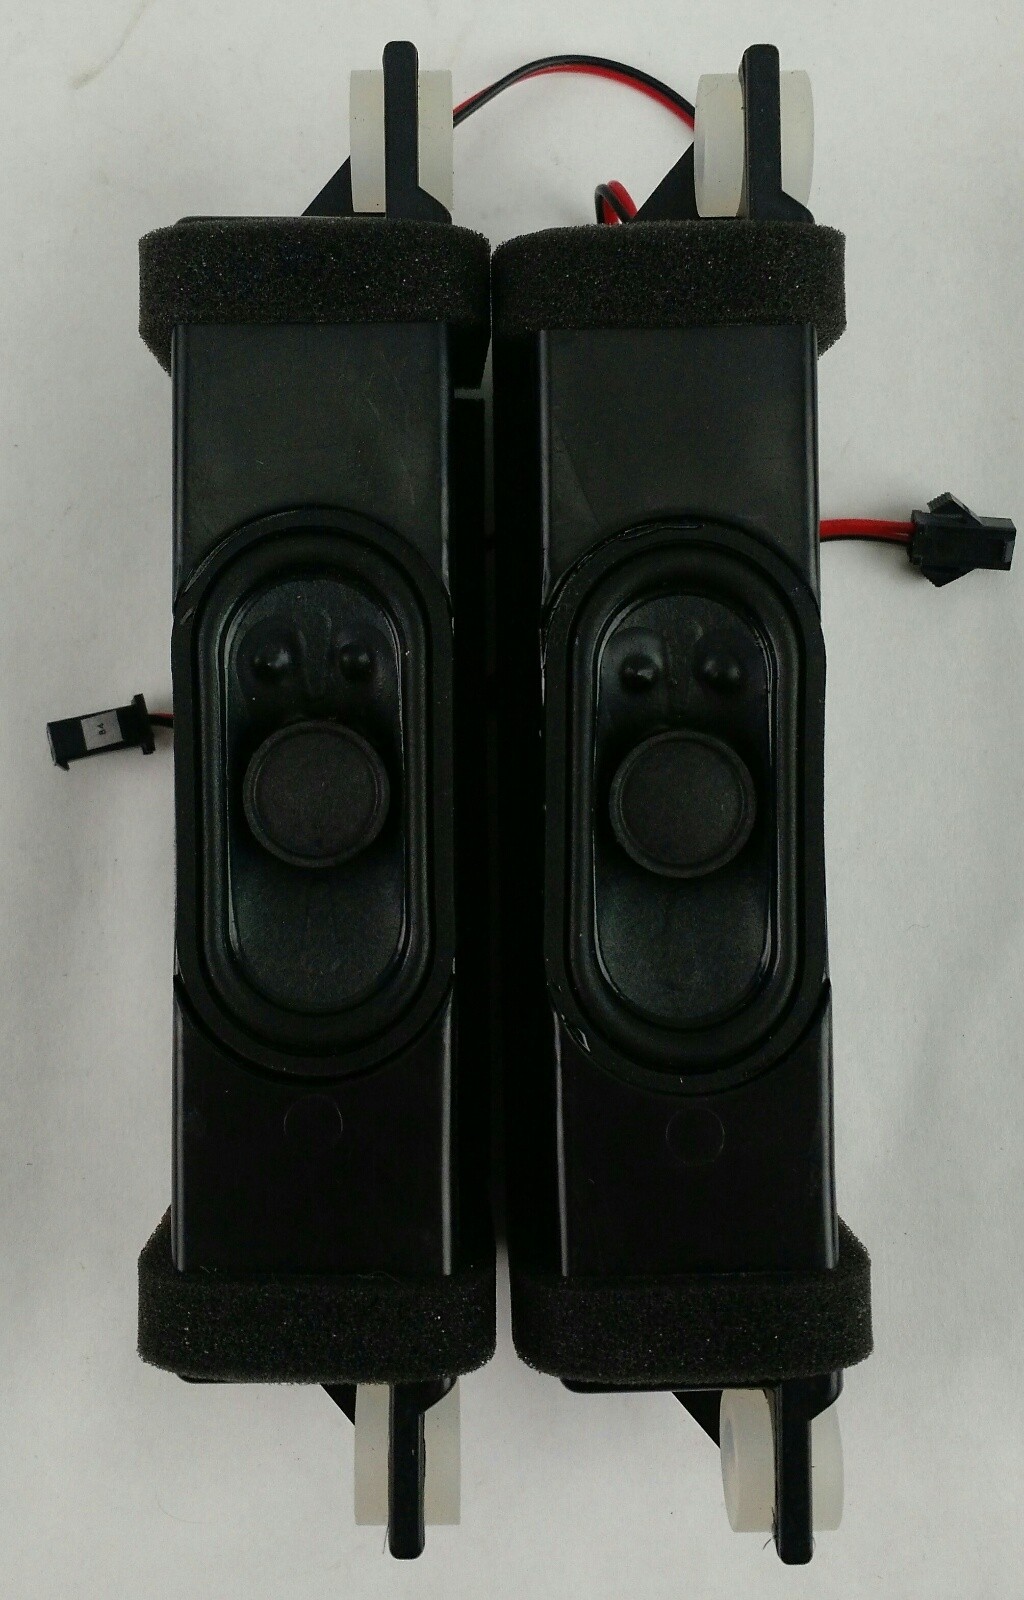 Hisense Replacement Speakers S02-A1 for 43H4030F TV